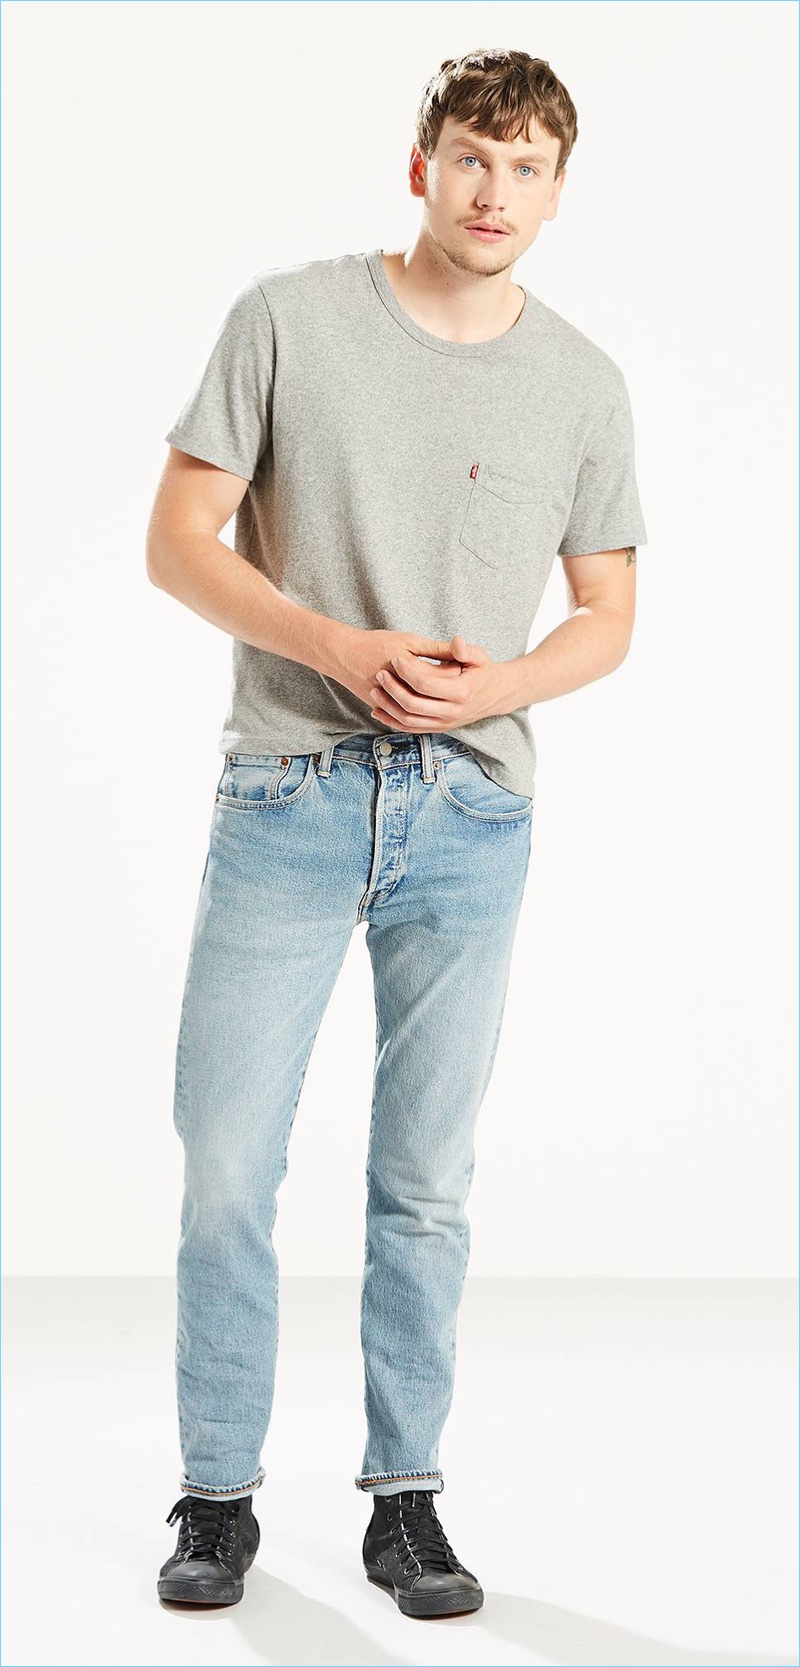 Distressed style reigns with Levi's 501 skinny jeans in Hillman.